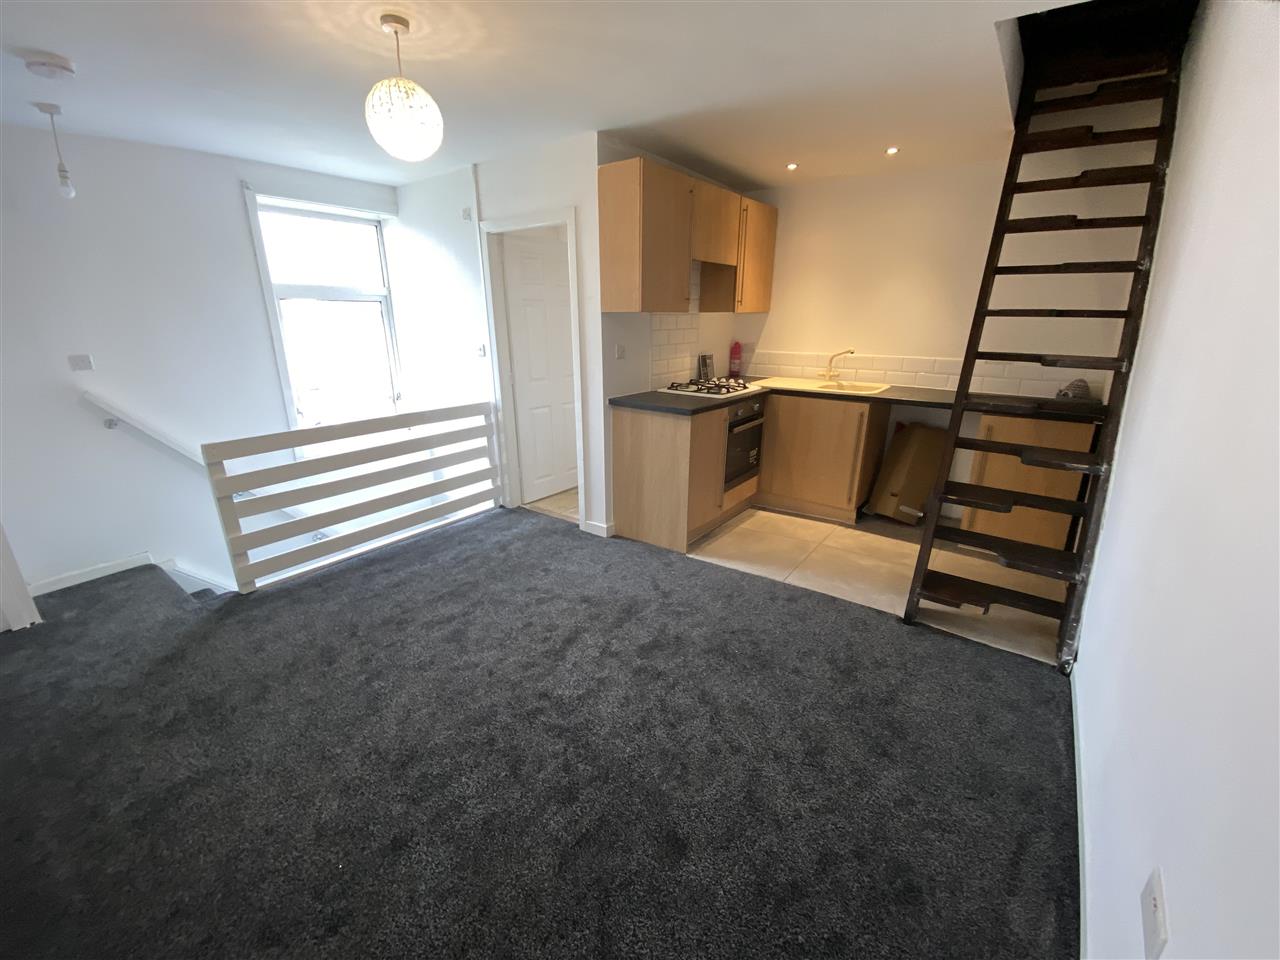 1 bed apartment to rent in Sudell Road,, Darwen, Darwen - Property Image 1